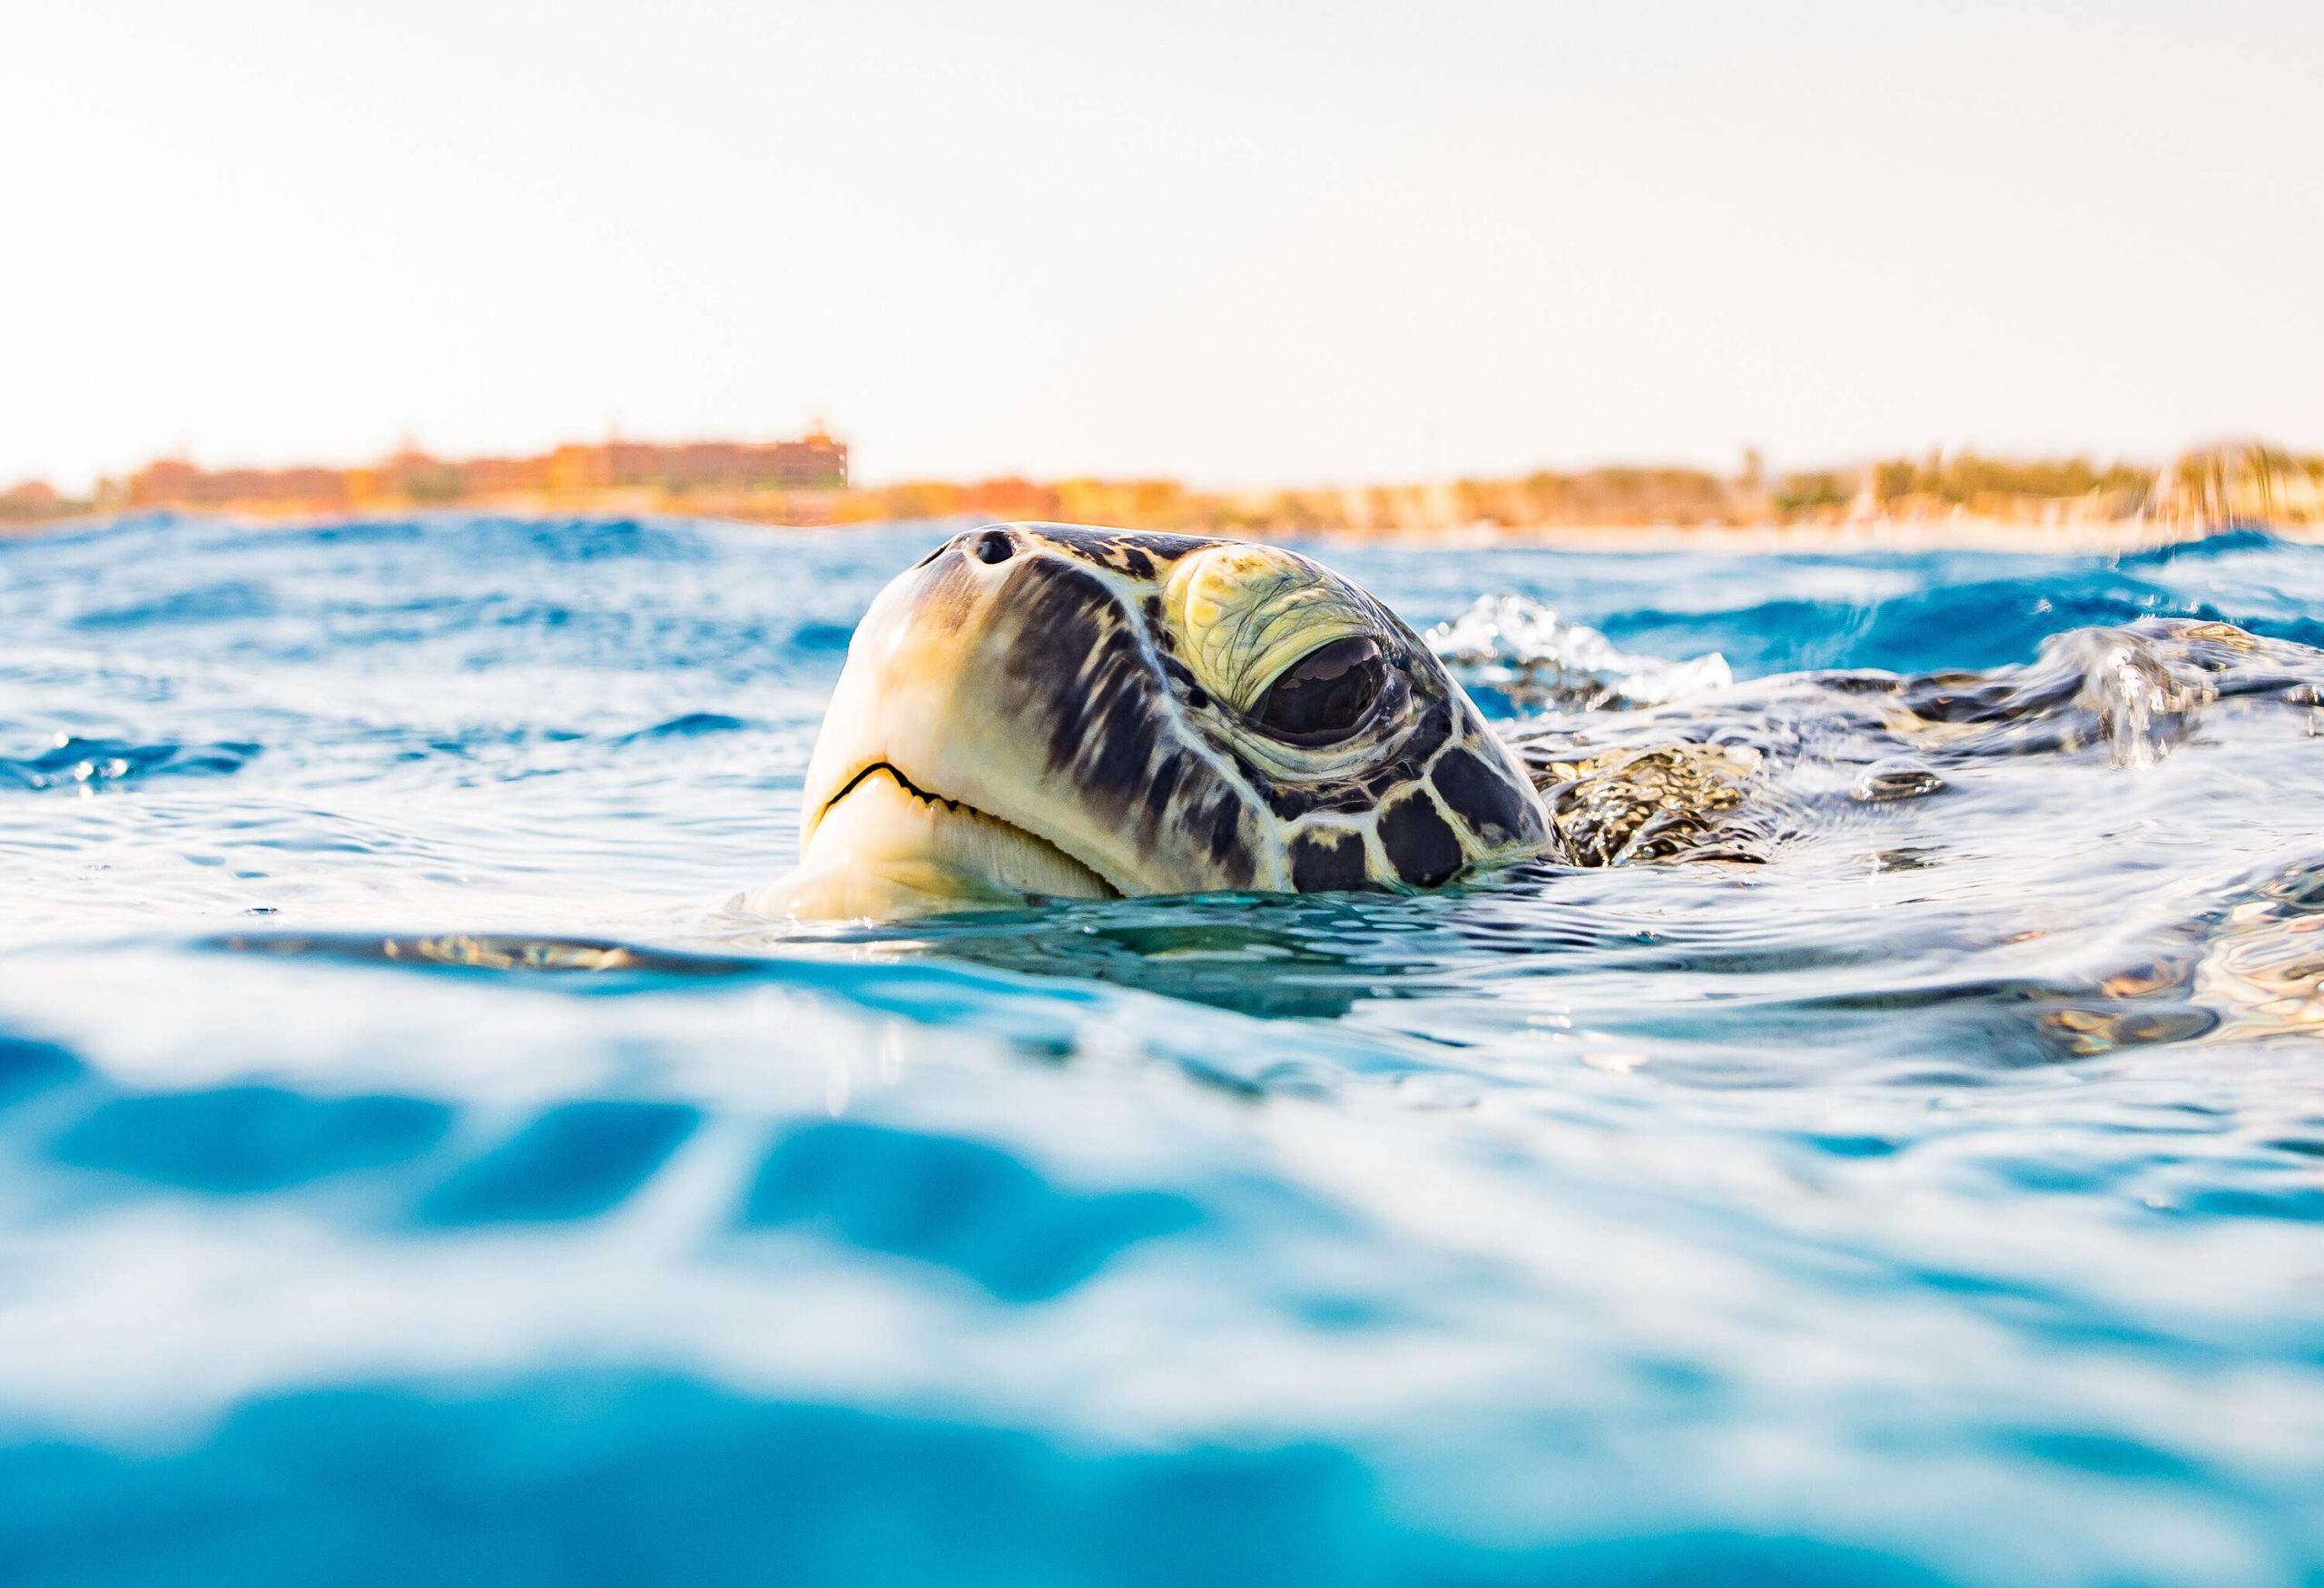 A sea turtle's head pokes out from the water's surface.